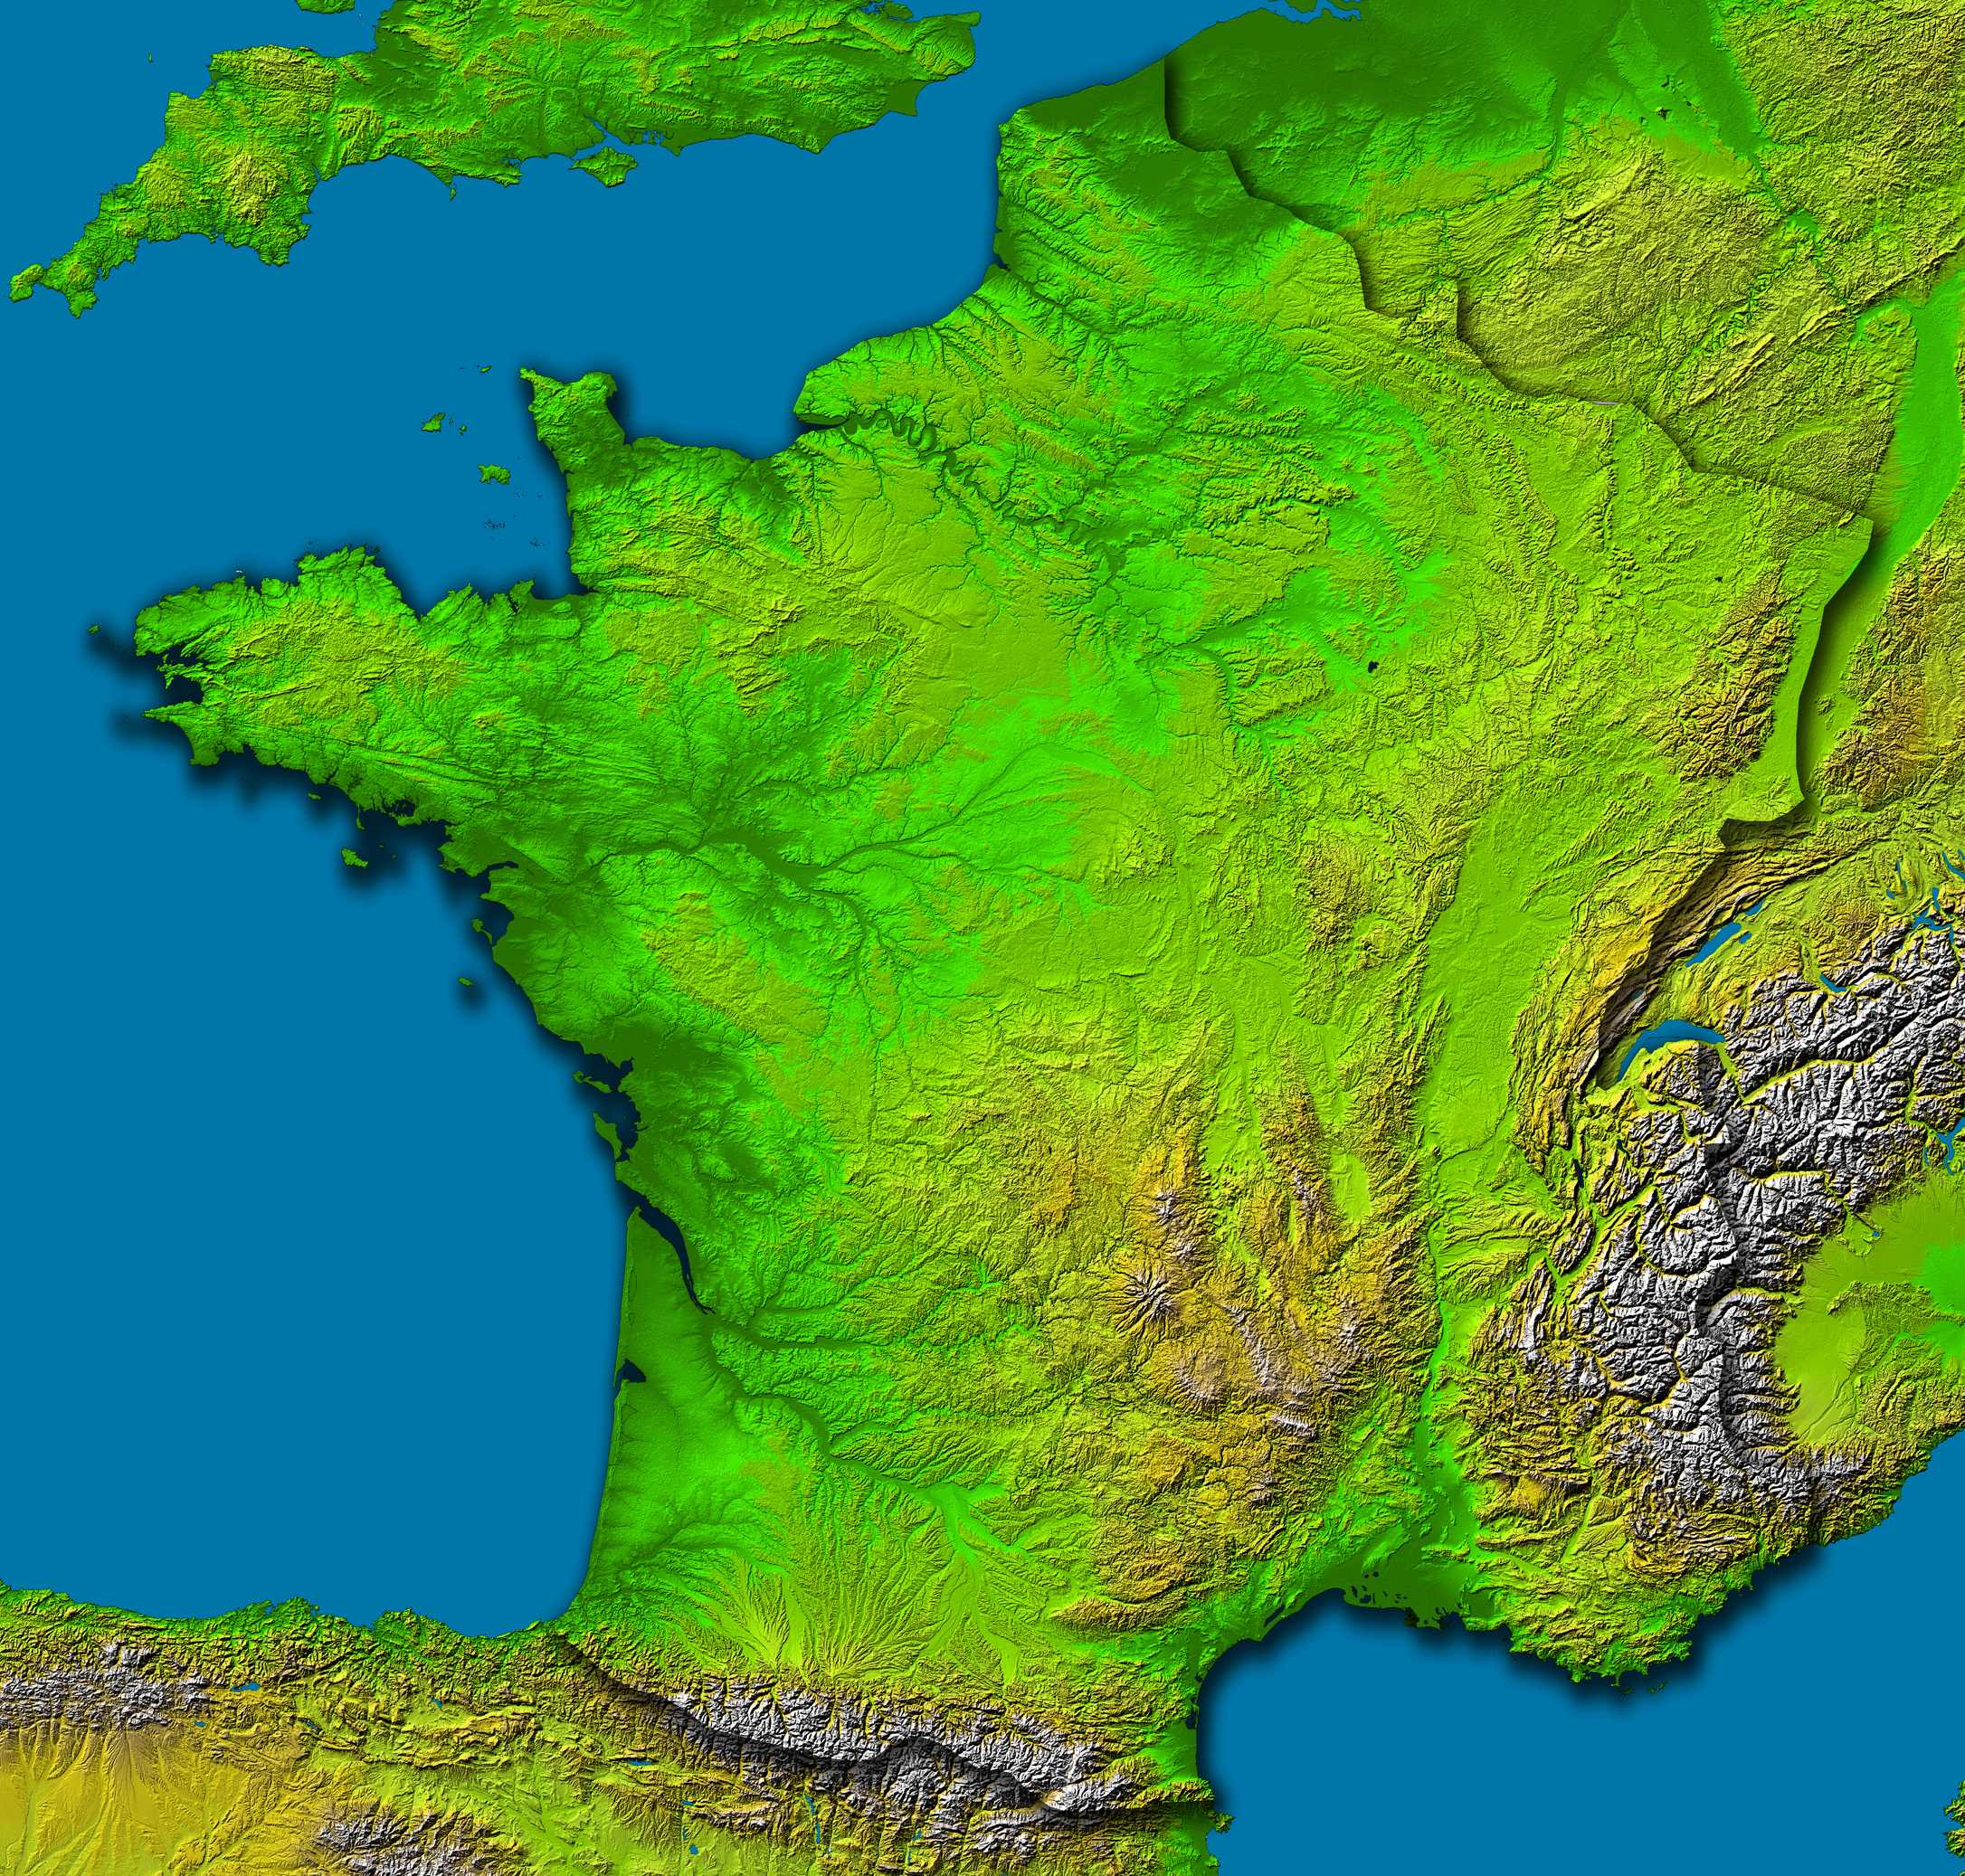 France topography